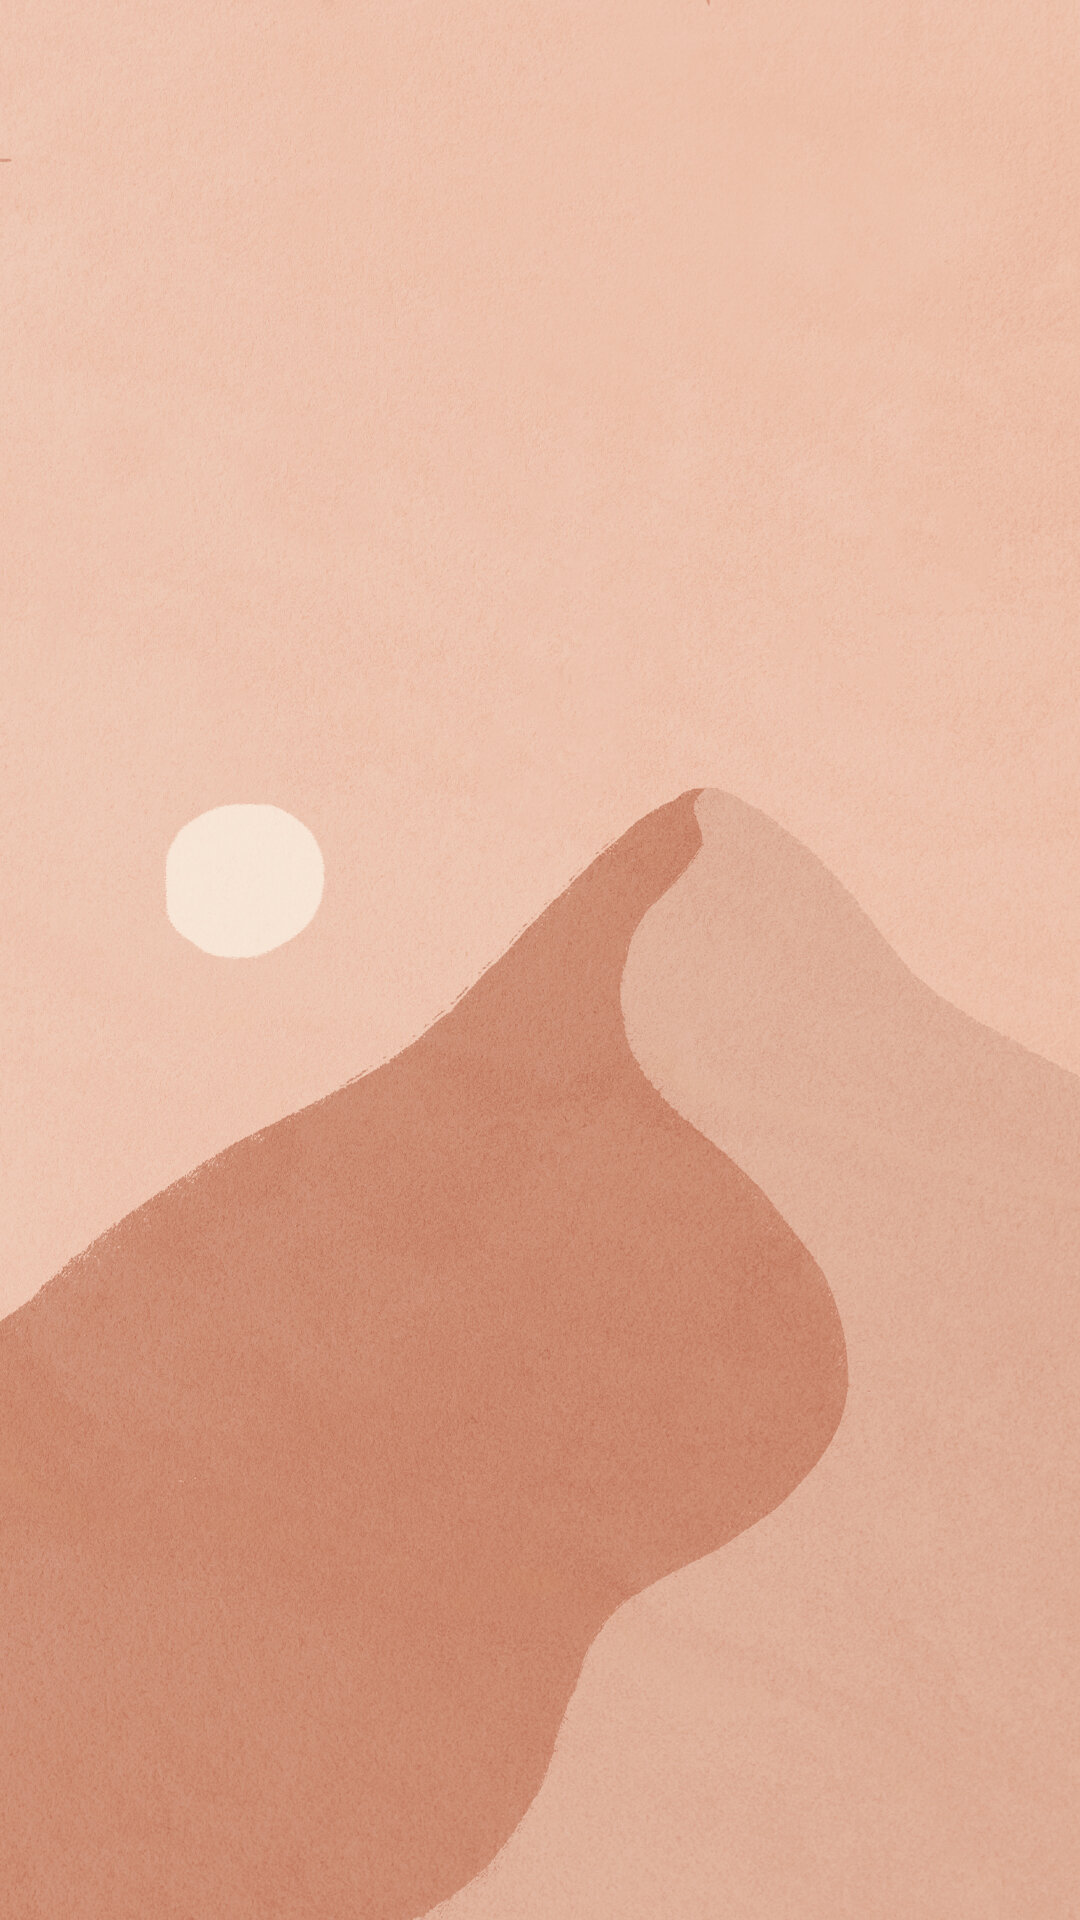 100 Summer IPhone Wallpapers That You Have To See  Artist Hue